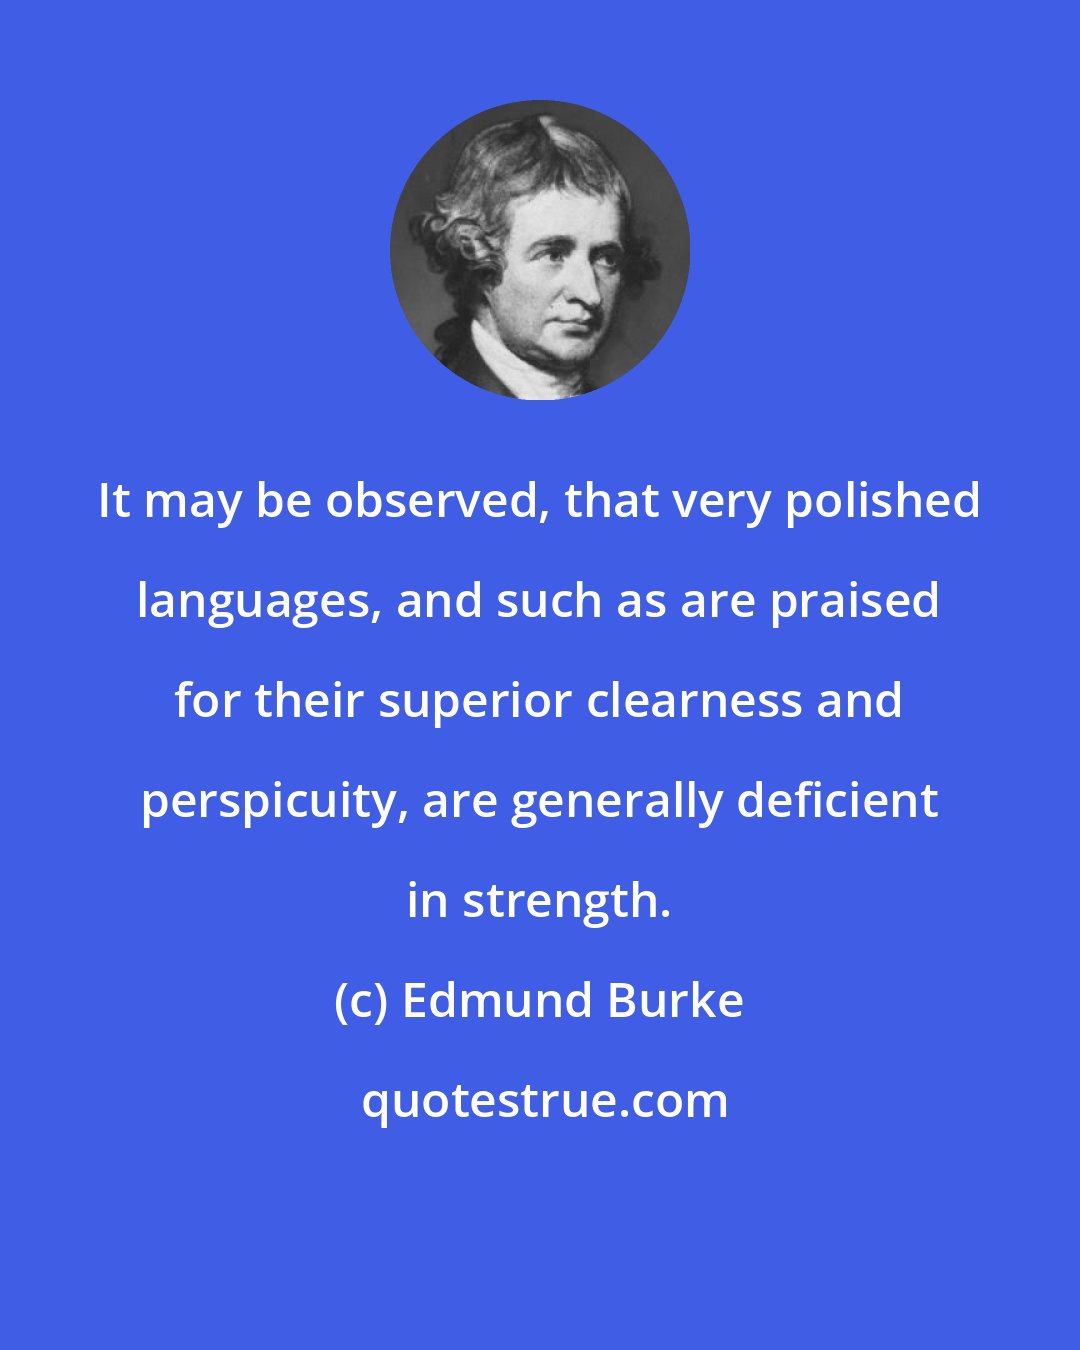 Edmund Burke: It may be observed, that very polished languages, and such as are praised for their superior clearness and perspicuity, are generally deficient in strength.